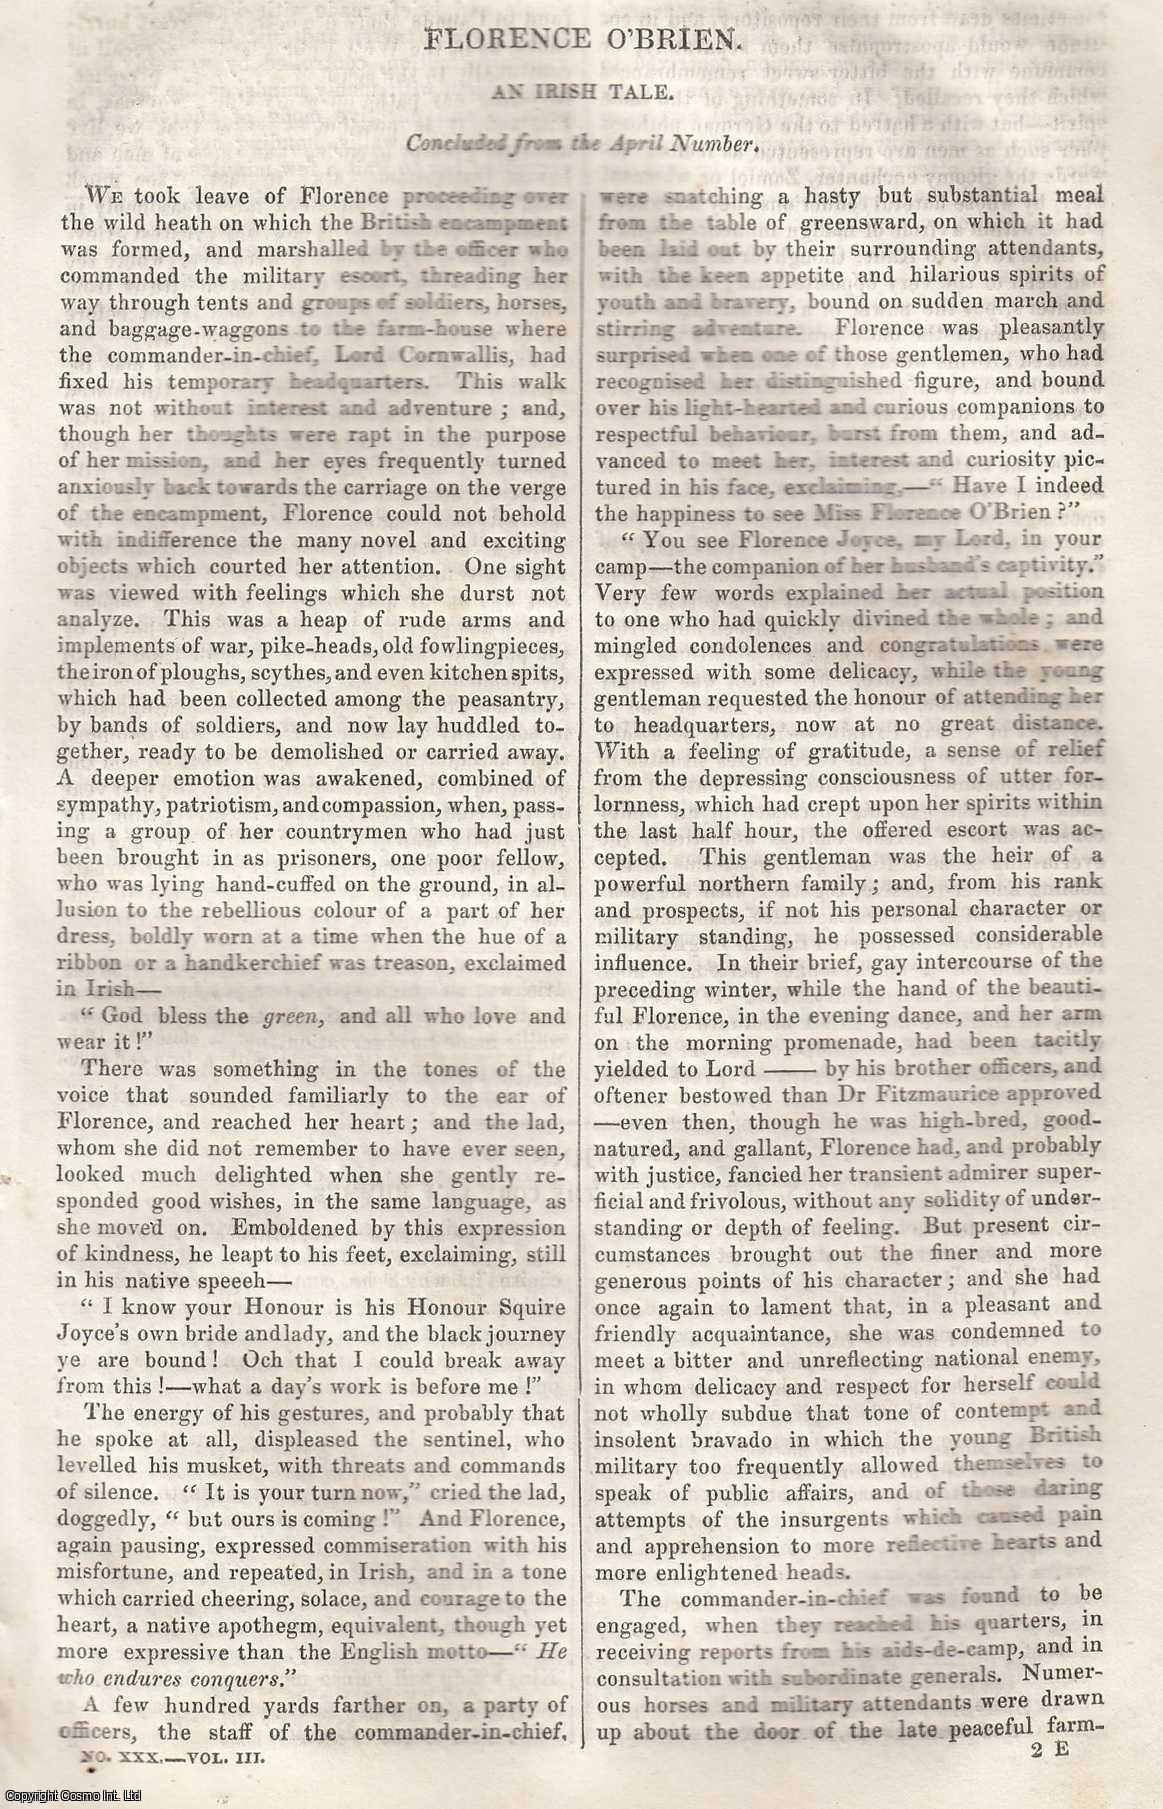 Johnstone, Christian - Florence O'Brien: An Irish Tale (Part 4, concluded.) An original article from Tait's Edinburgh Magazine, 1836.